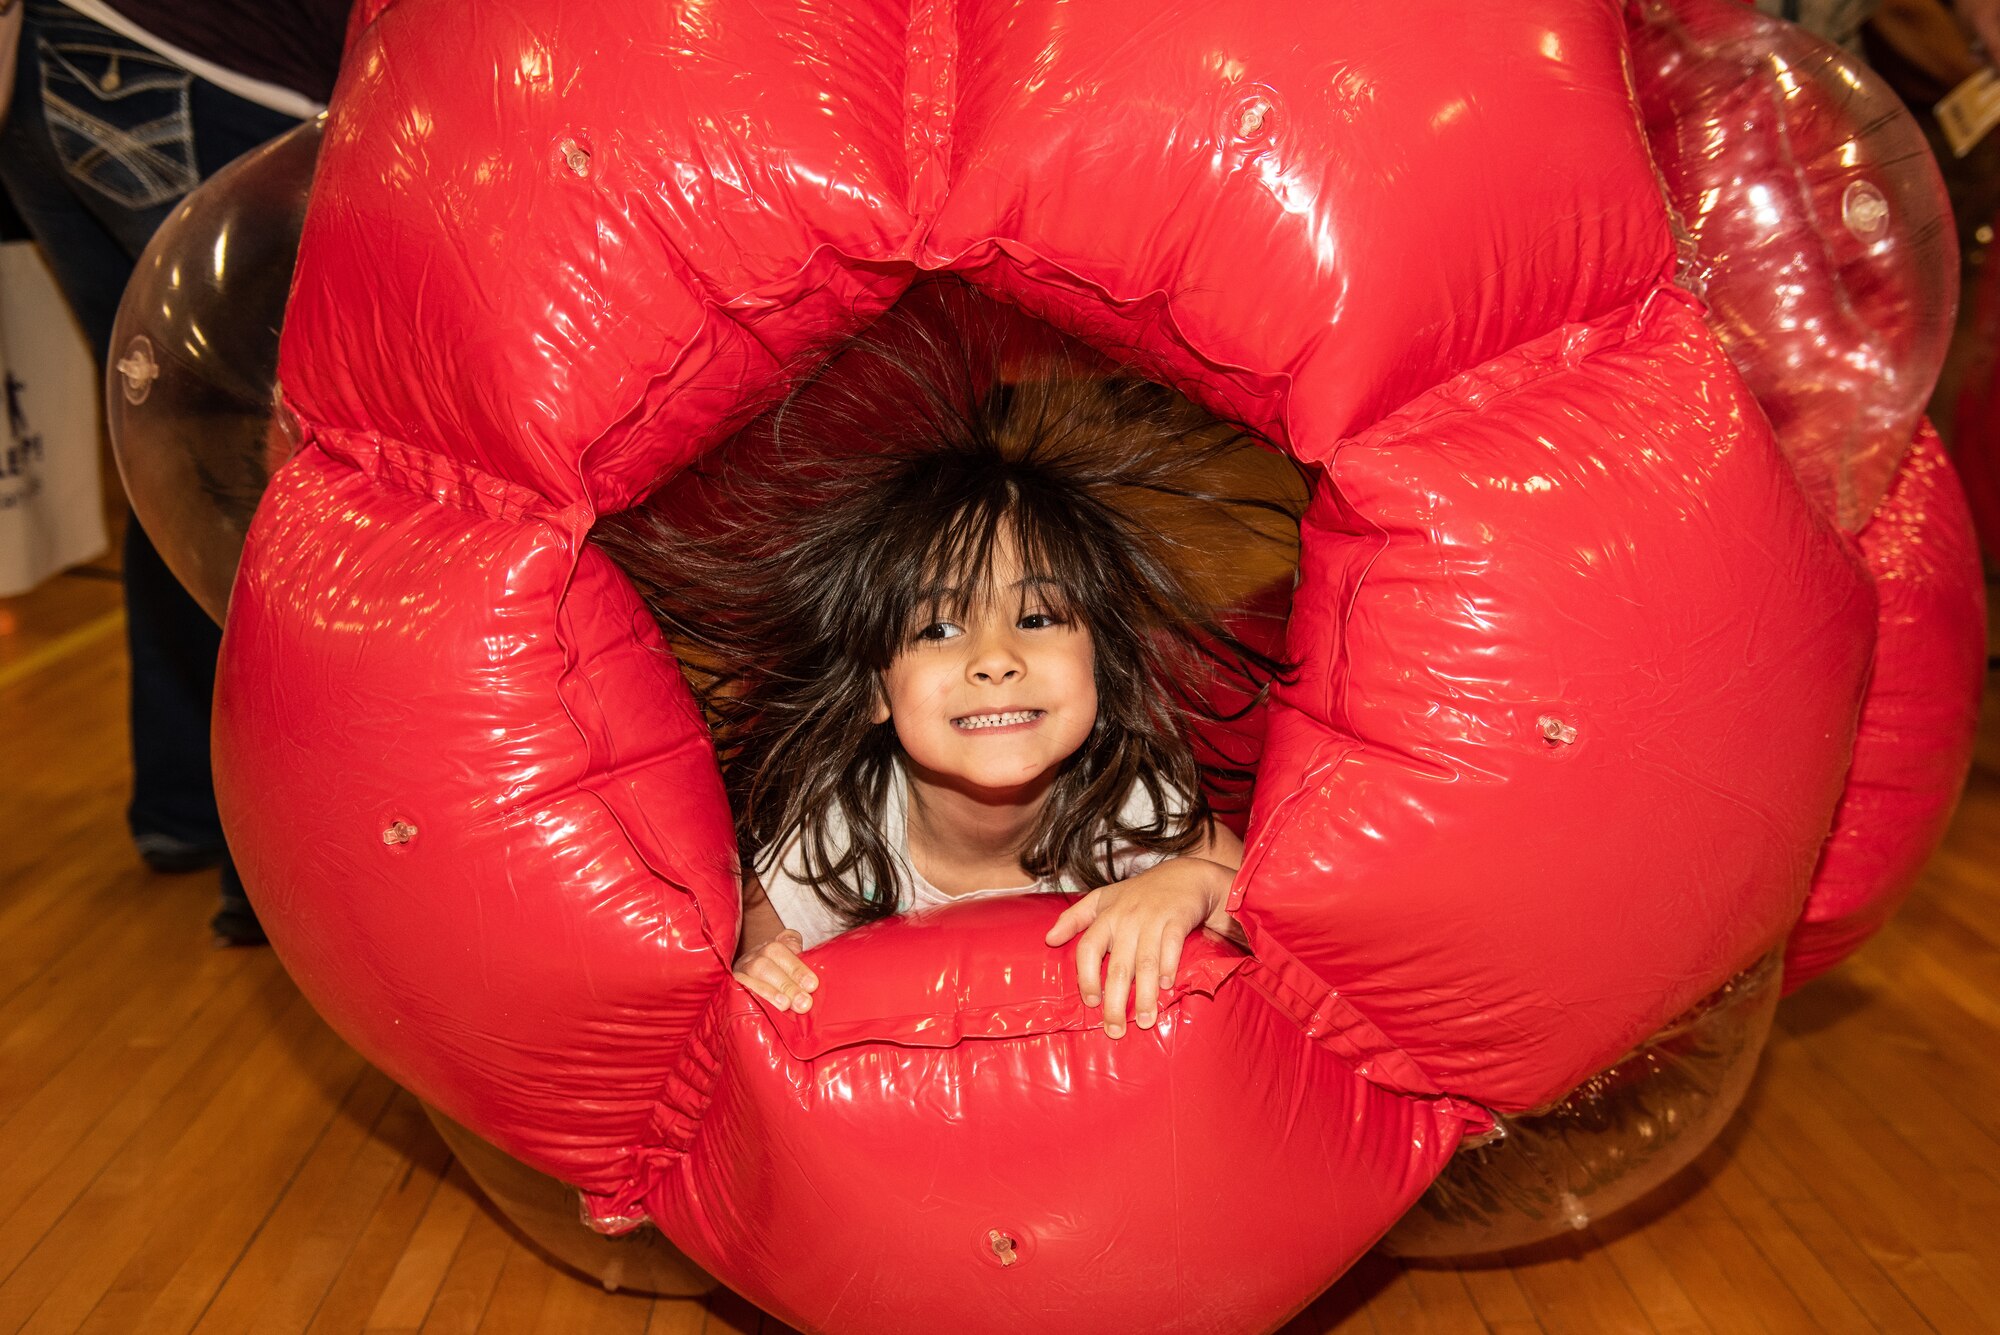 A child plays inside of an inflatable toy at the Month of the Military Child Celebration at Luke Air Force Base, Ariz., April 5, 2019. Several children took turns with games, face painting, a DJ and much more to celebrate the families of military members. (U.S. Air Force photo by Airman 1st Class Leala Marquez)